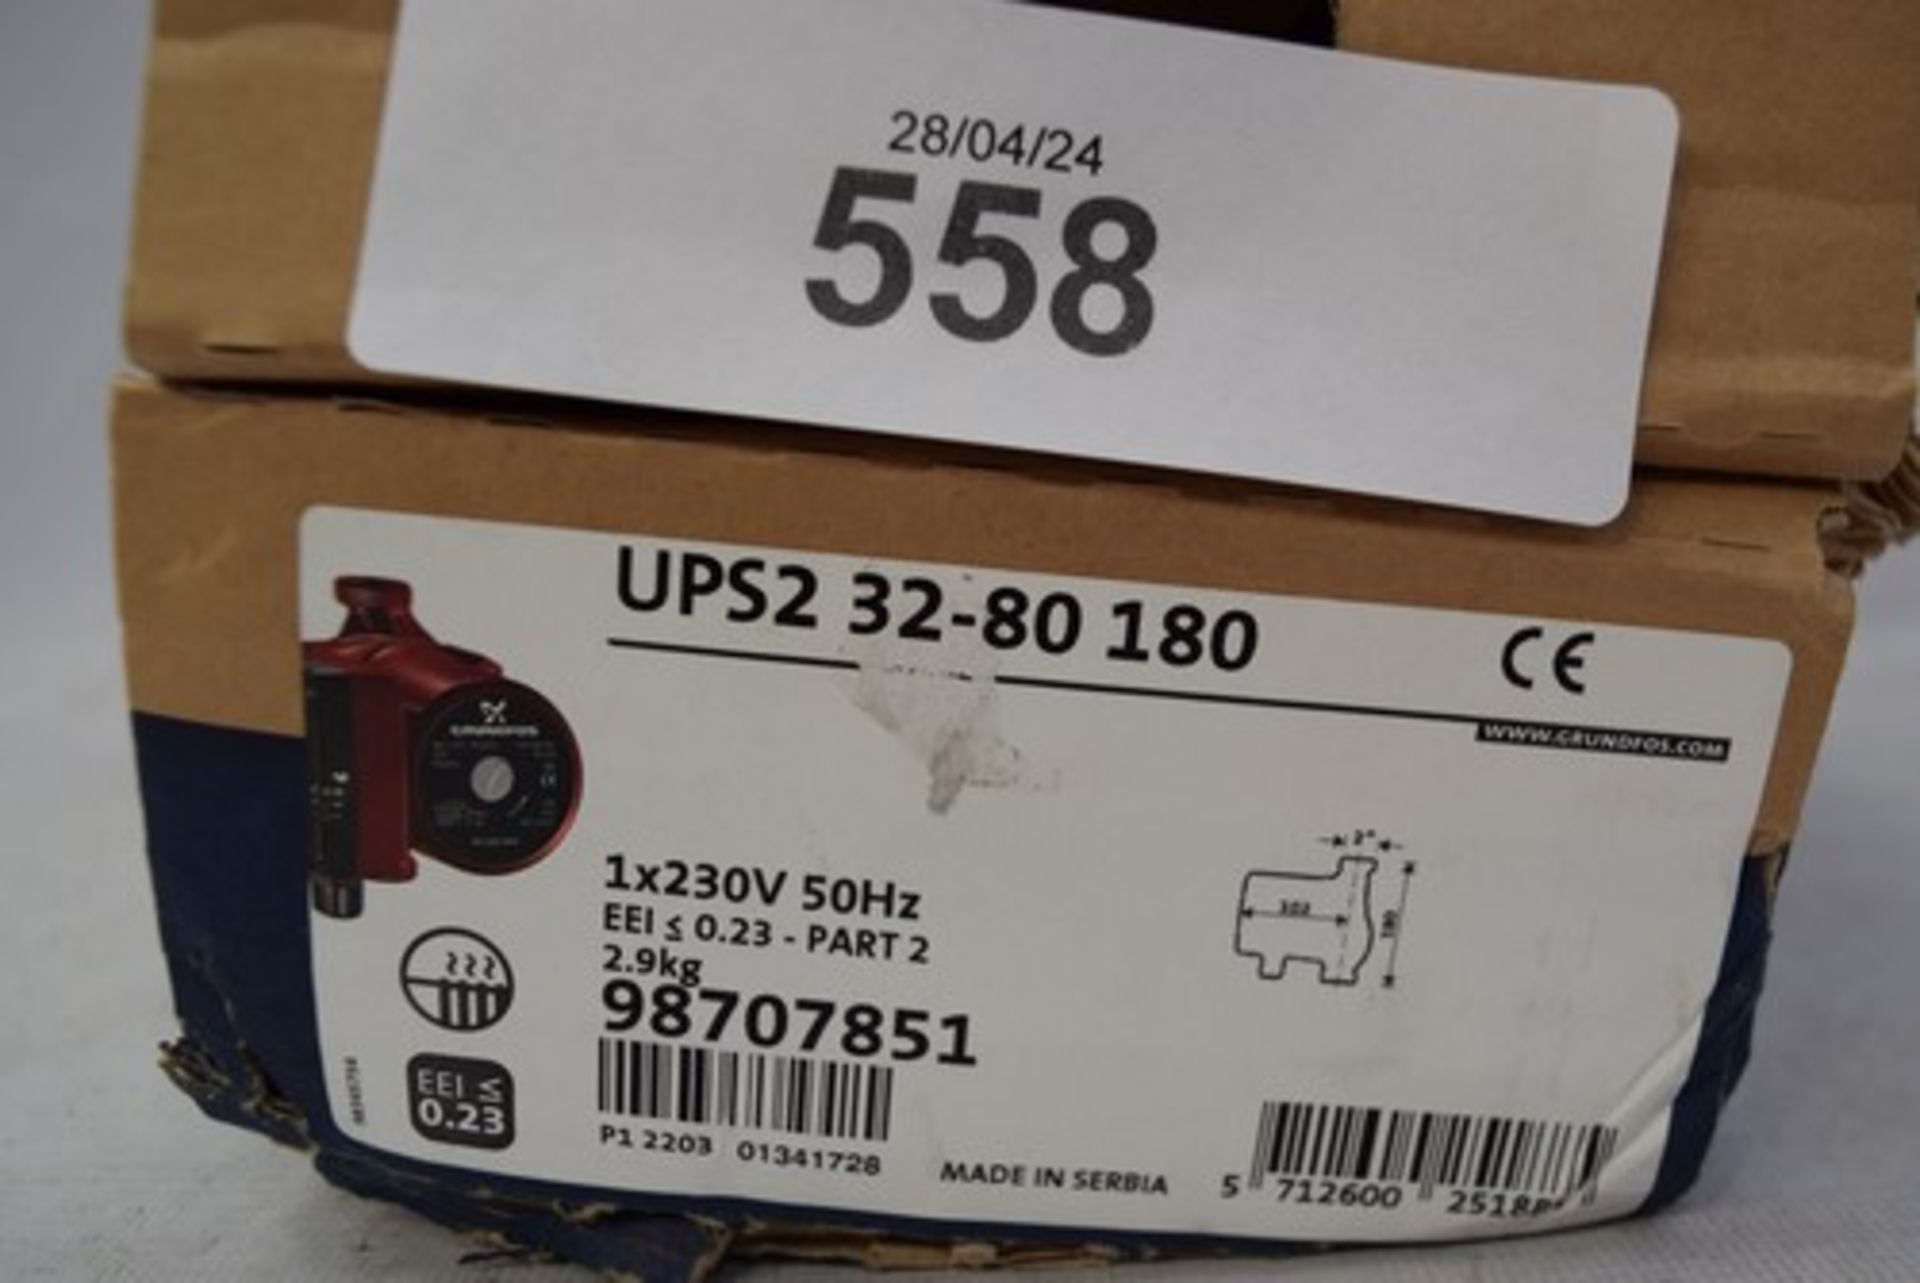 1 x Grundfos UPS 32-80 light commercial circulating pump - New in box (GS5) - Image 2 of 2